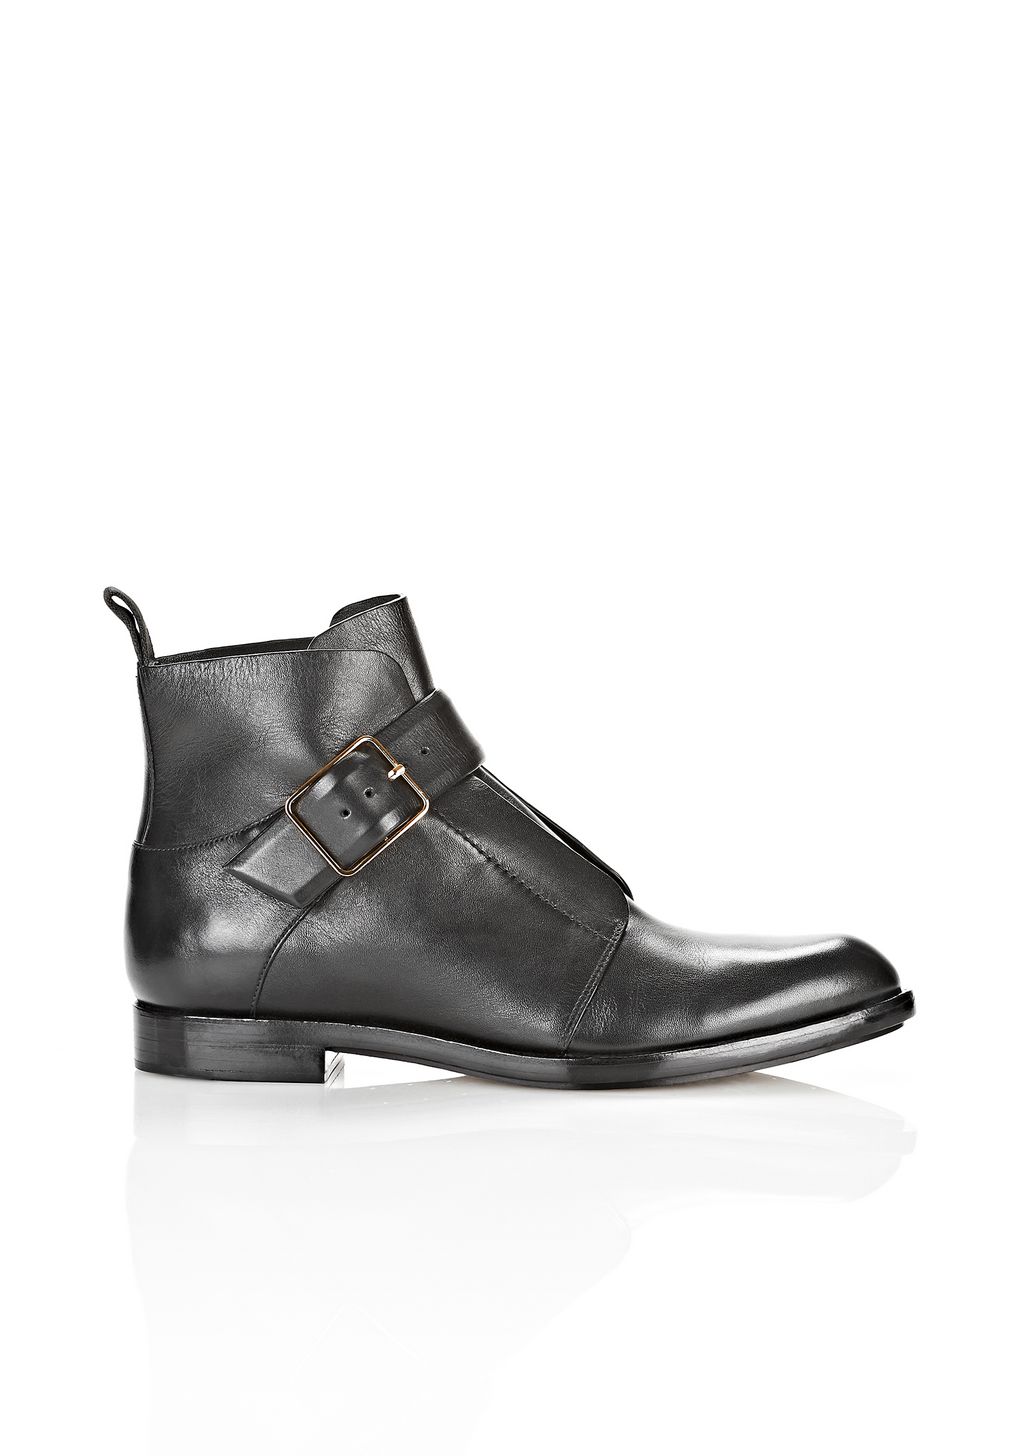 Alexander Wang ‎LENA ANKLE BOOT ‎ ‎BOOTS‎ | Official Site